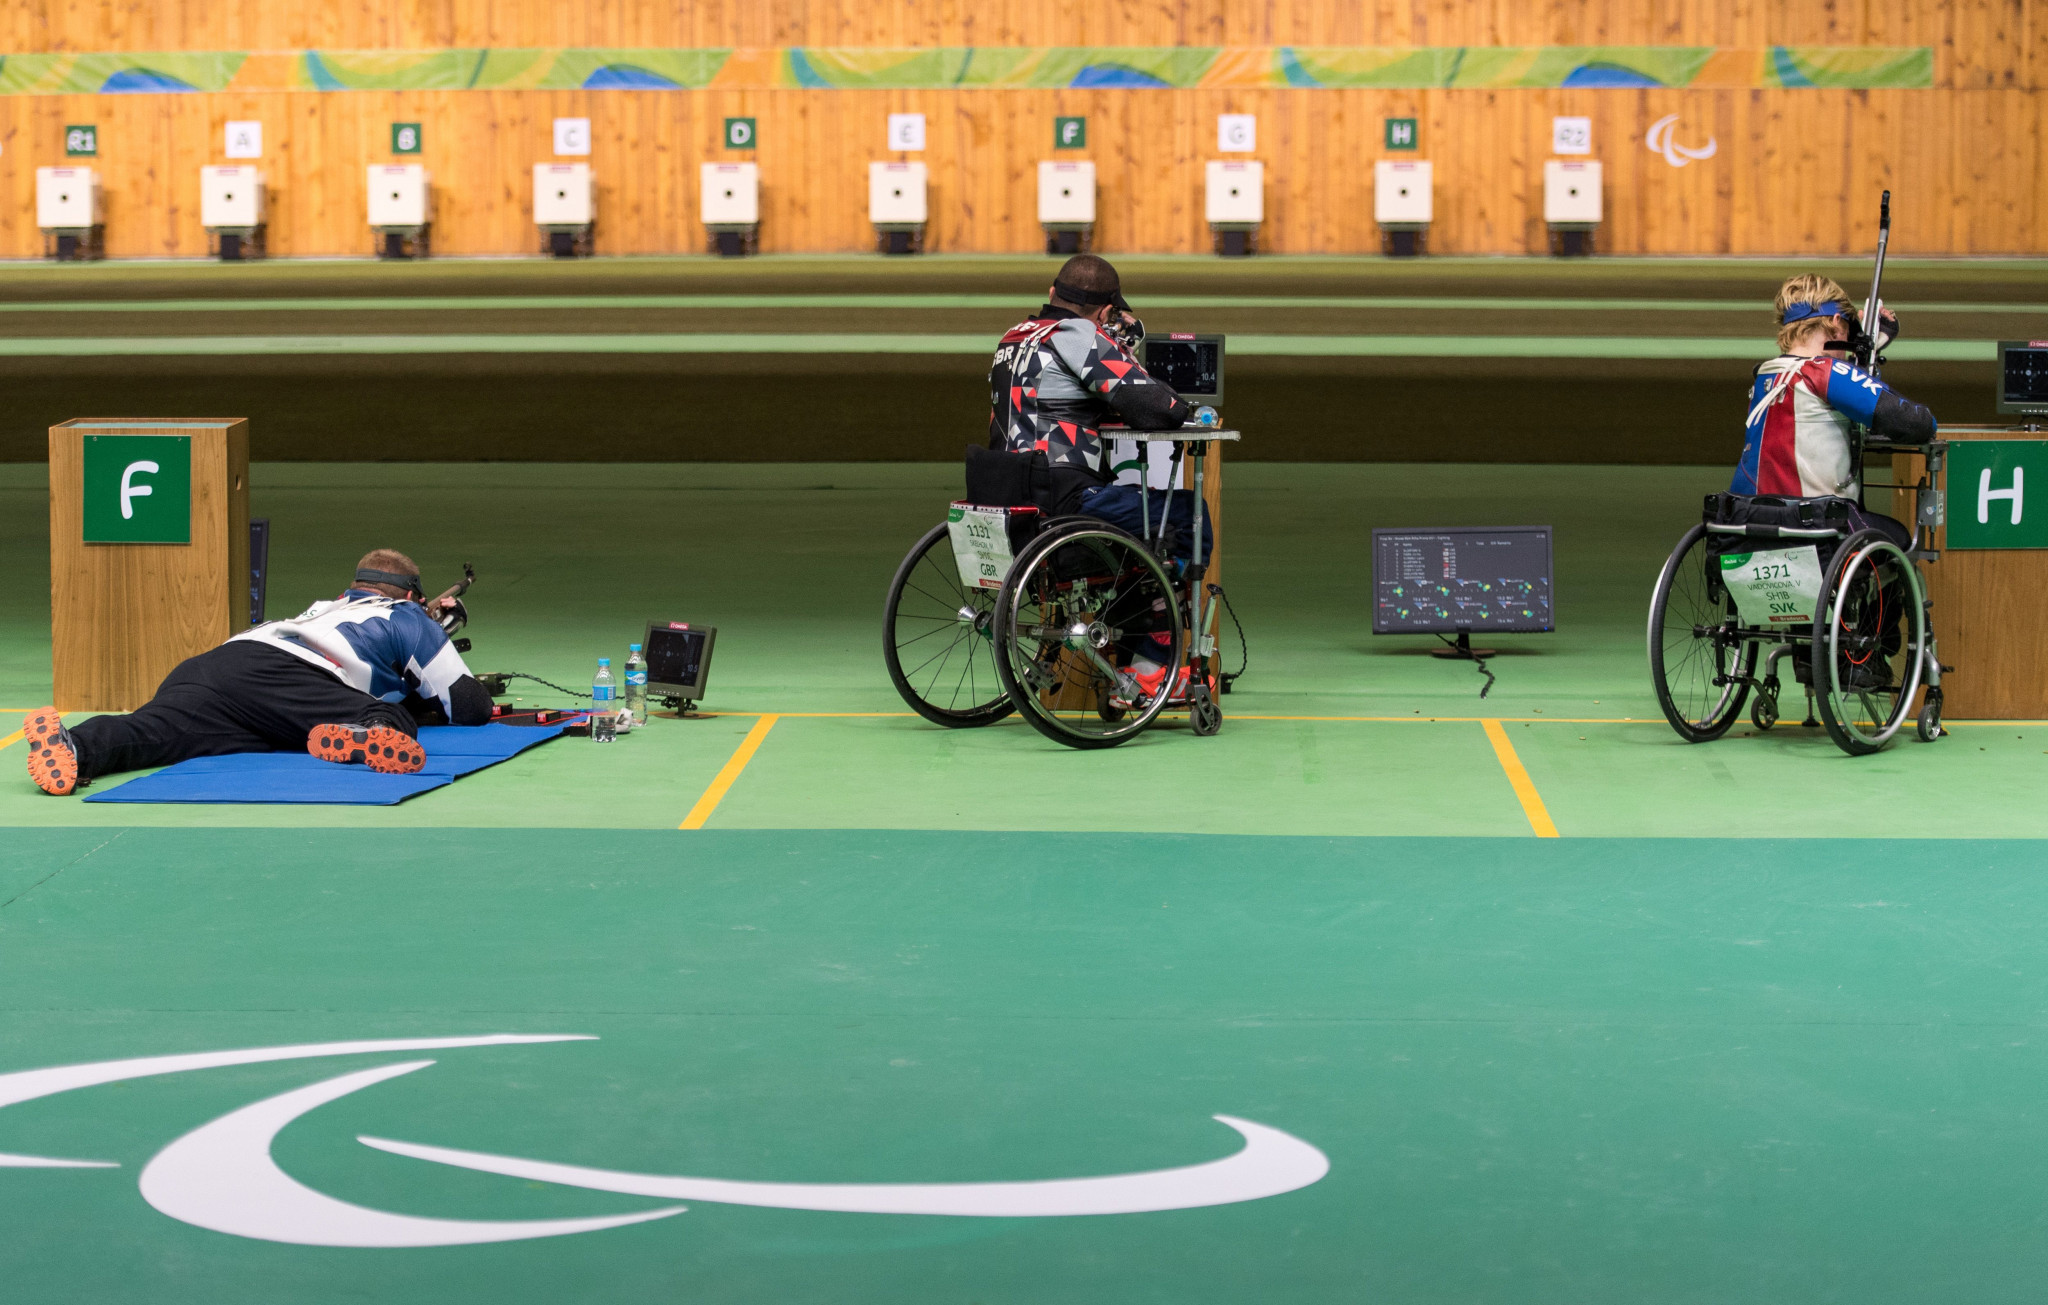 Will Anti will oversee the US Para shooting team at events including the 2020 Paralympic Games in Tokyo ©Getty Images